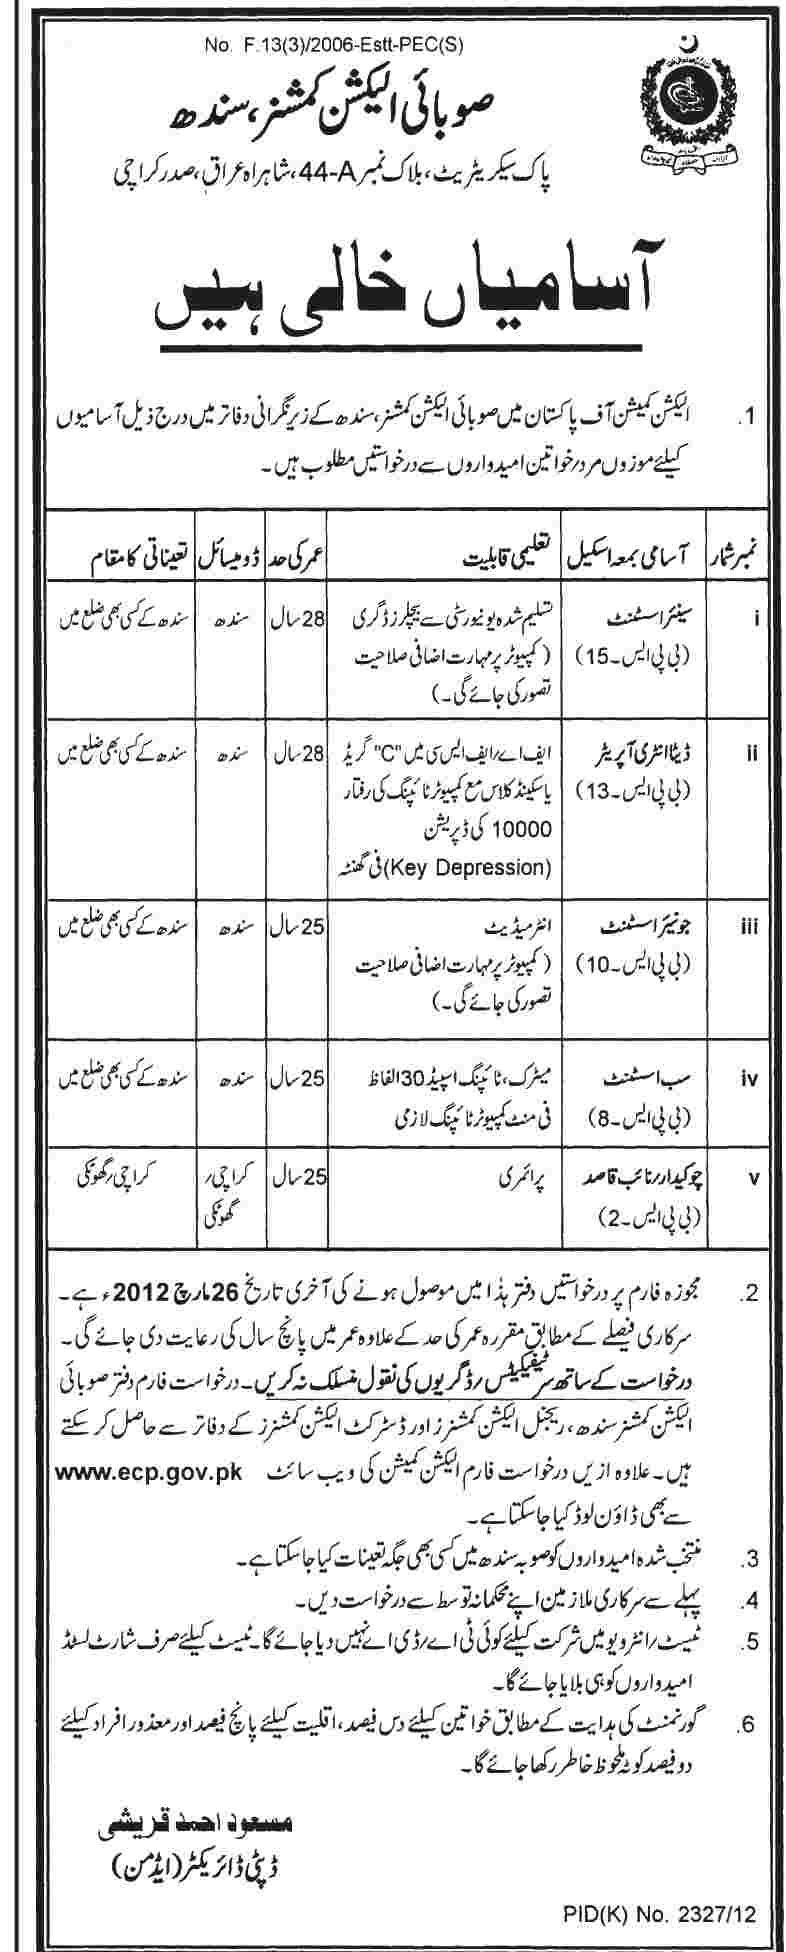 The Office of Provincial Election Commissioner Sindh (Govt Jobs) Requires Staff